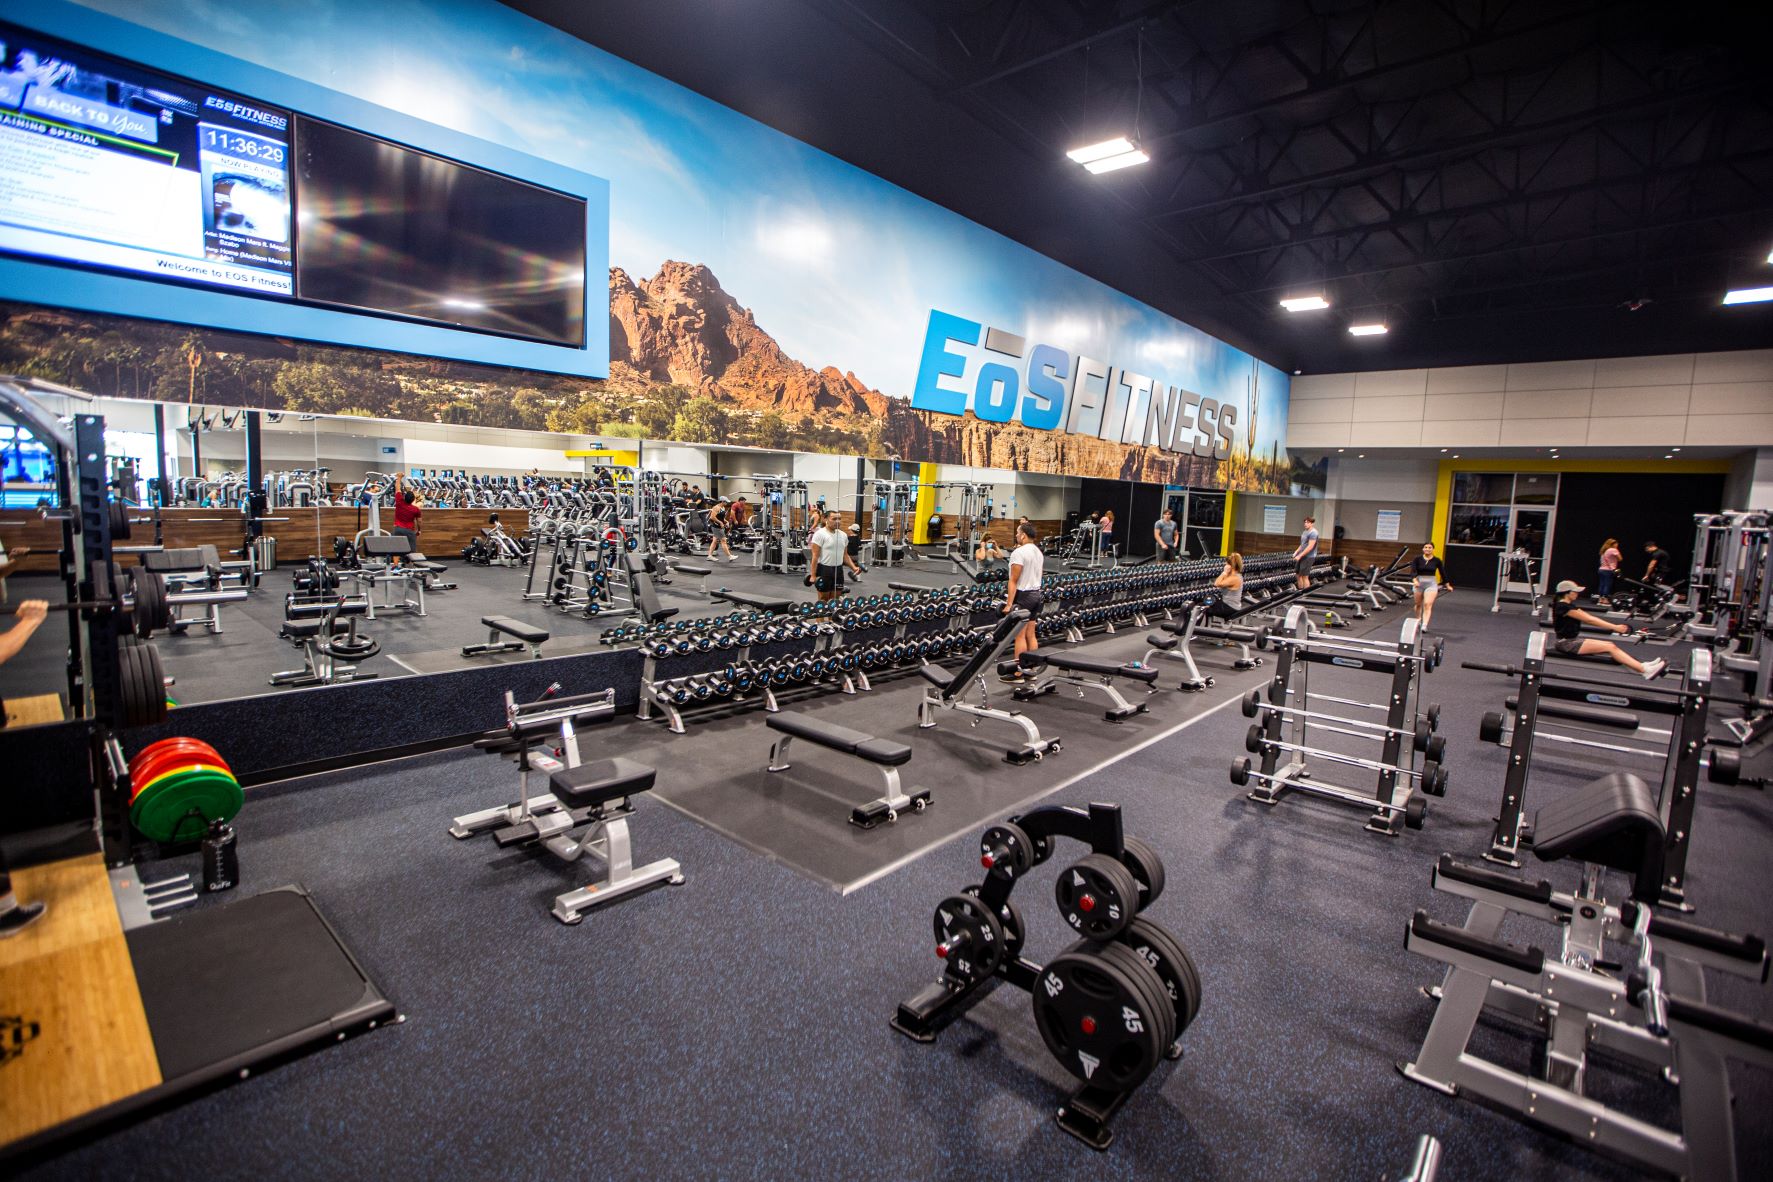 A eos fitness gym filled with lots of exercise equipment.